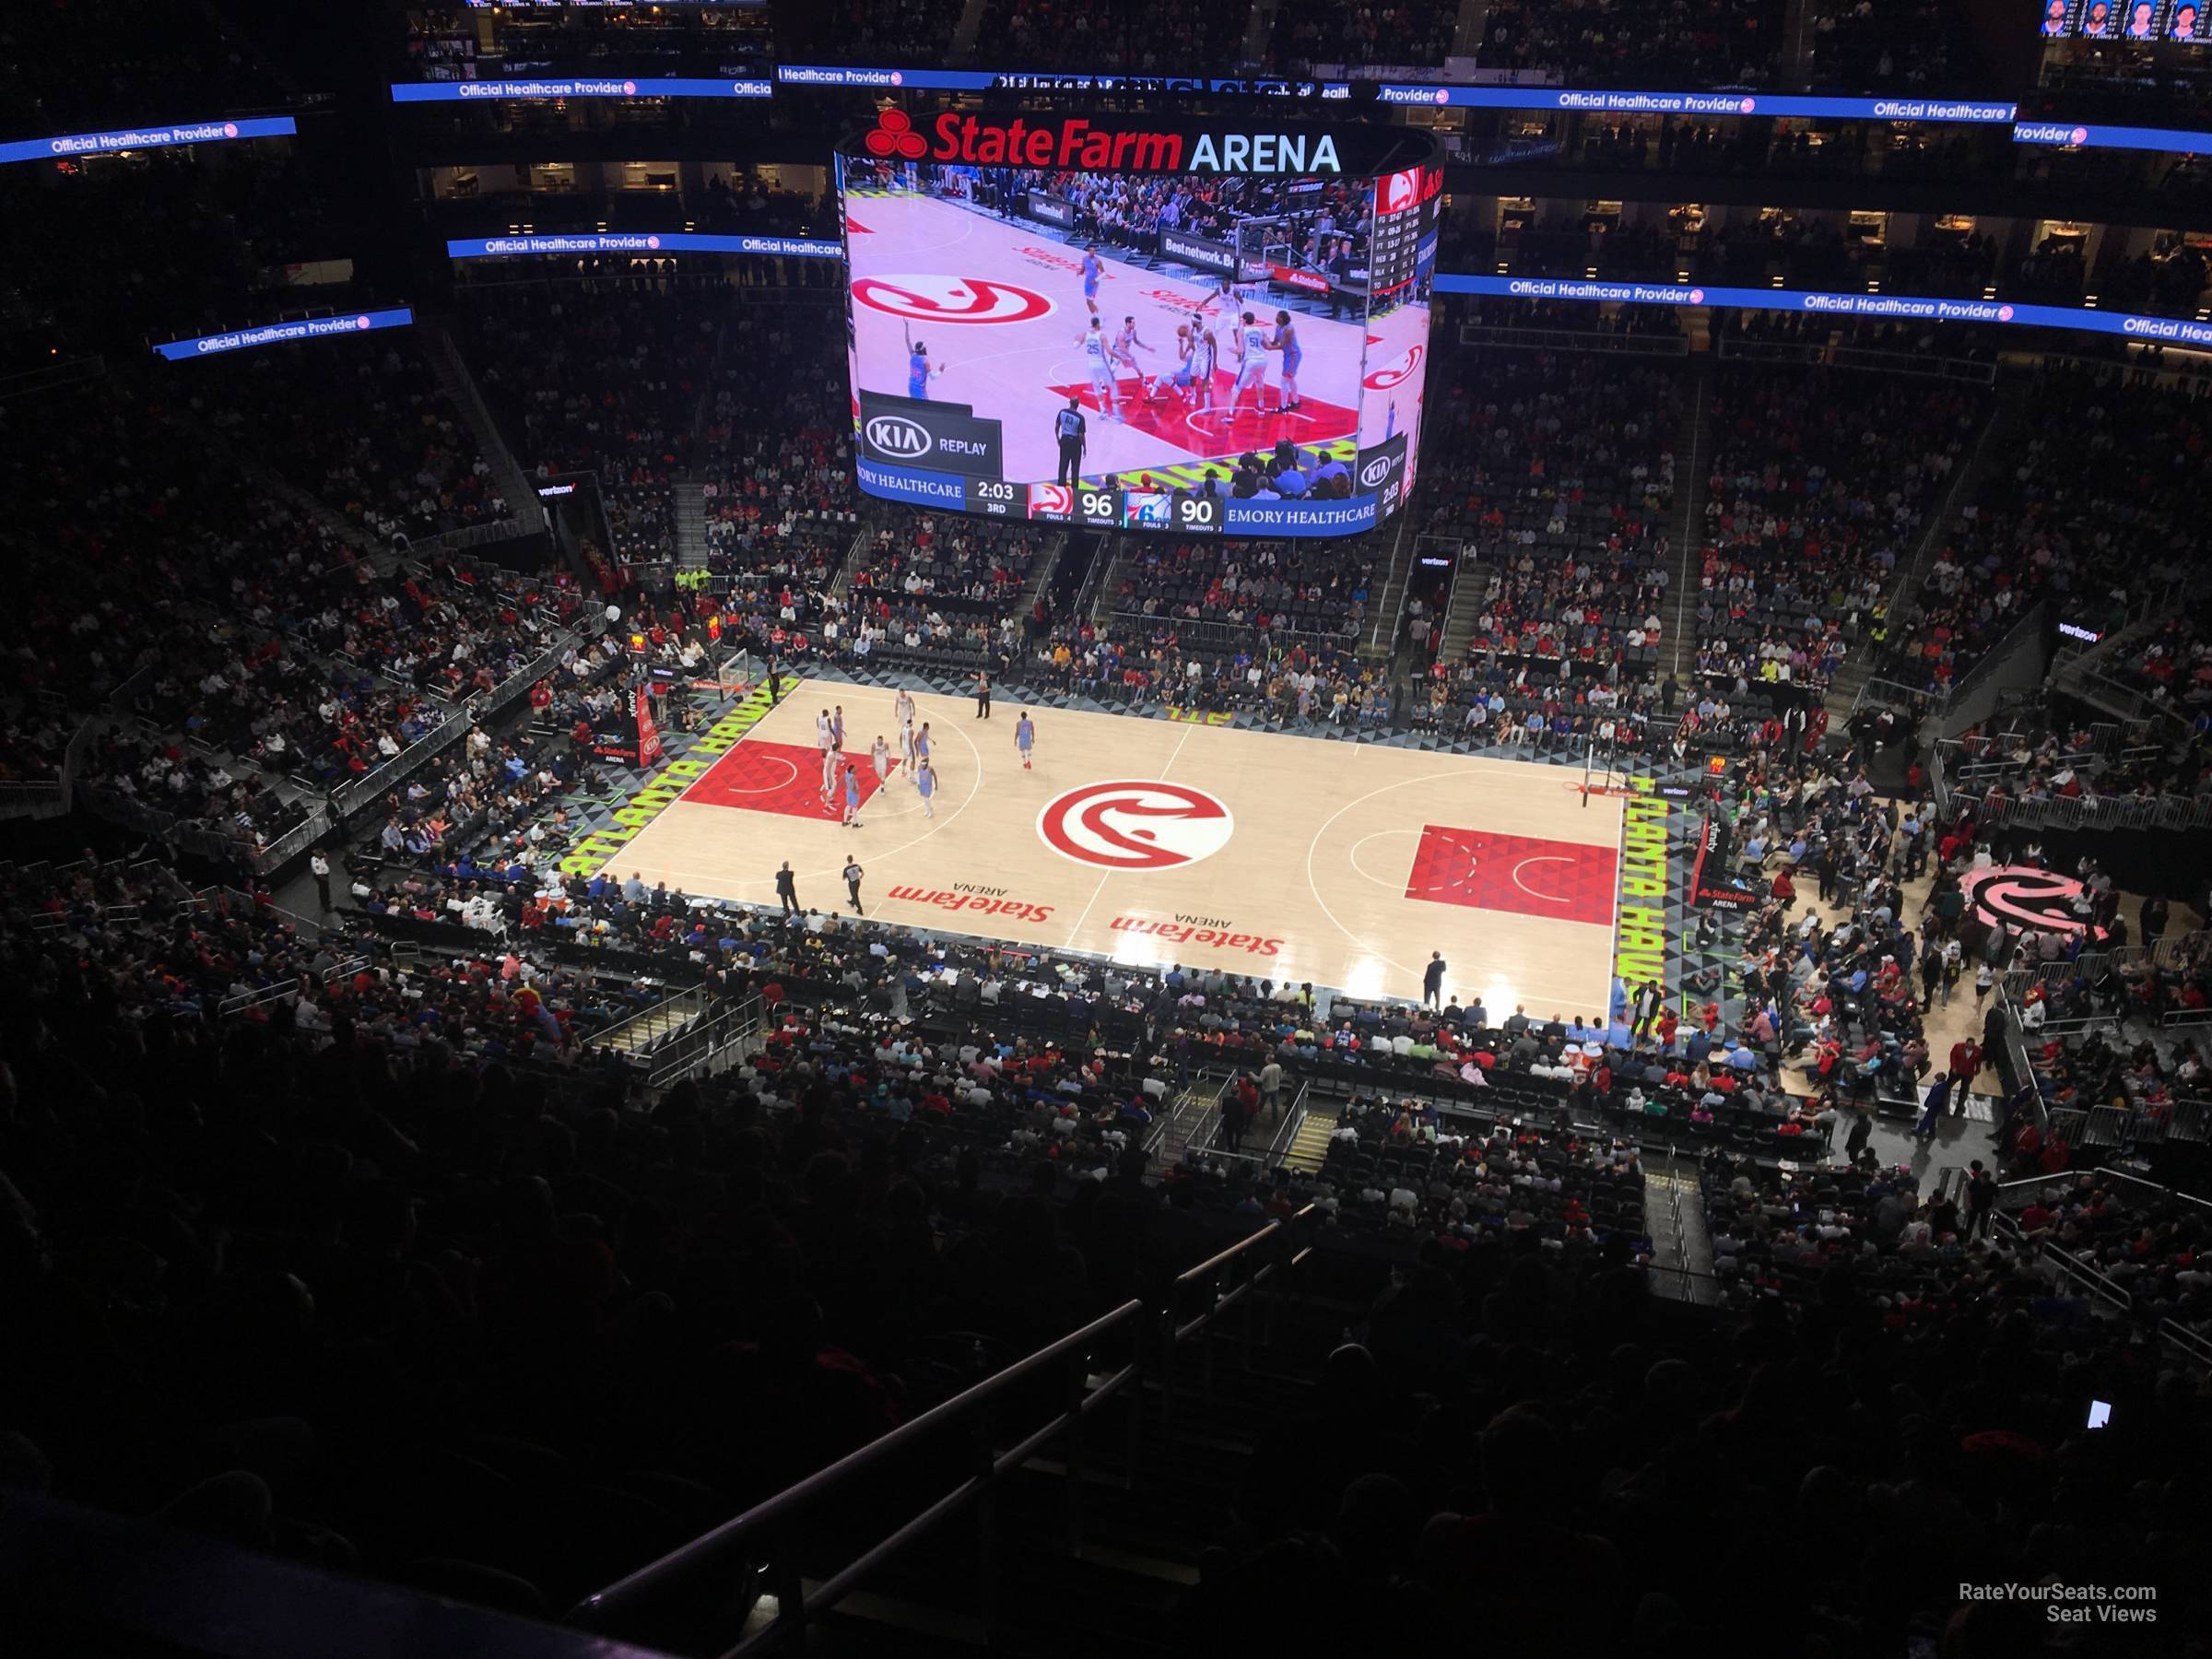 section 221, row n seat view  for basketball - state farm arena